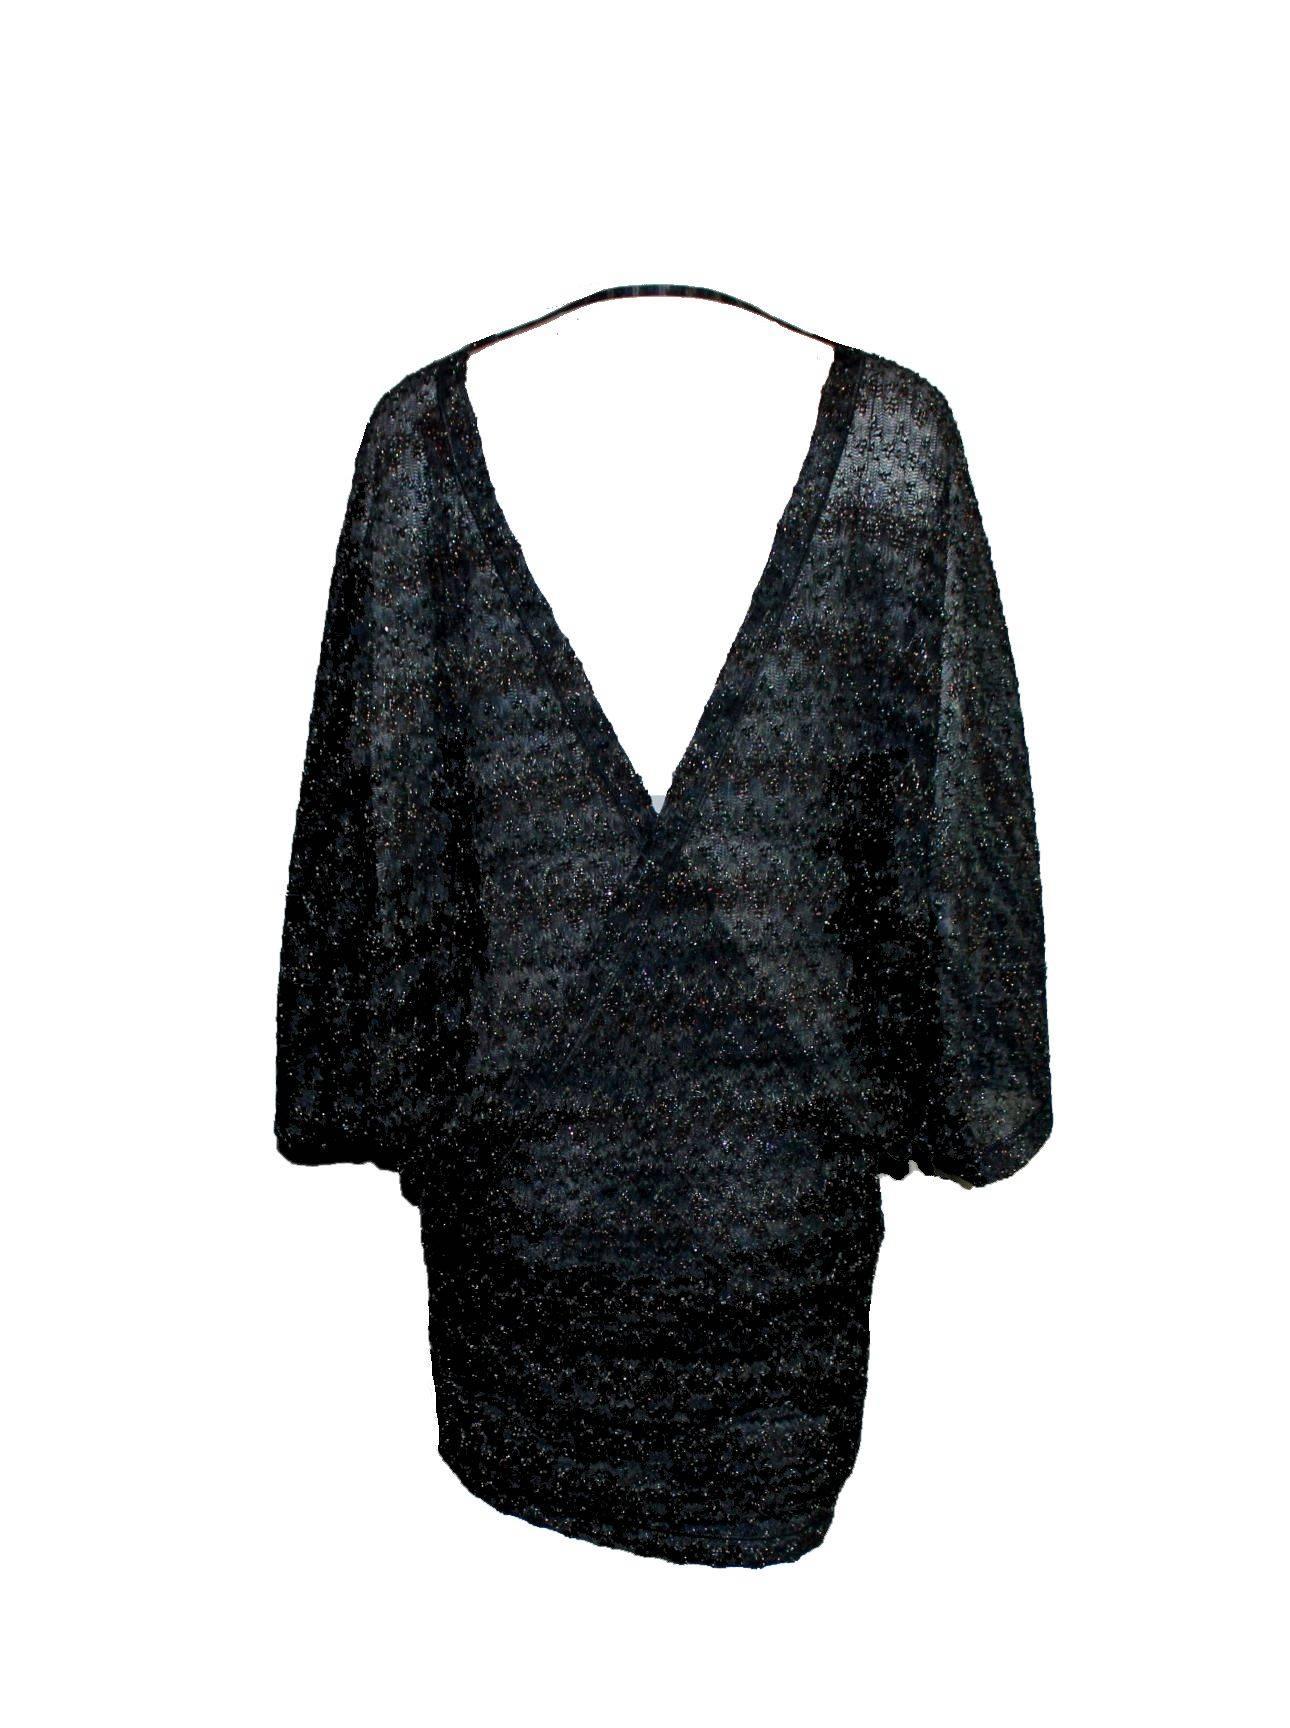 Beautiful multicolored midnight blue lurex MISSONI kaftan dress
Classic MISSONI signature knit
Simply slips on
Wrap style
V-Neck
Batwing sleeves
Crochet-knit details - so beautiful!
Dry Clean only
Made in Italy
